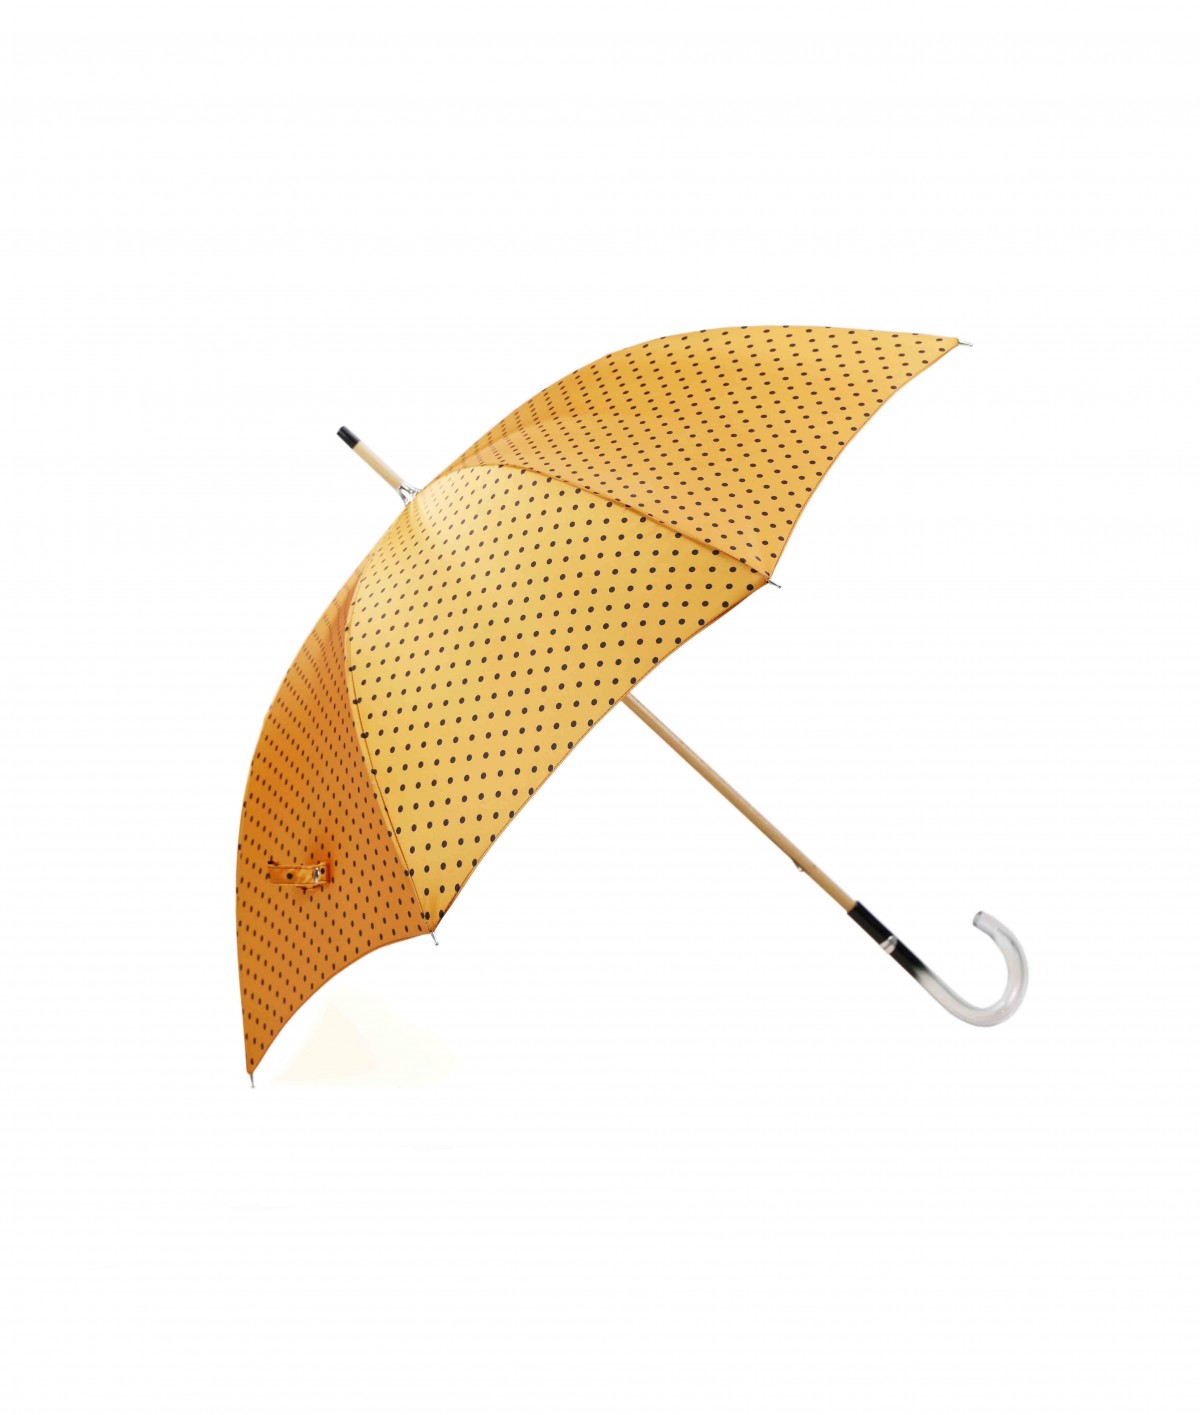 → Fancy Printed Satin Umbrella - Long Manual N°19 - Made in France by Maison Pierre Vaux French Umbrella Manufacturer